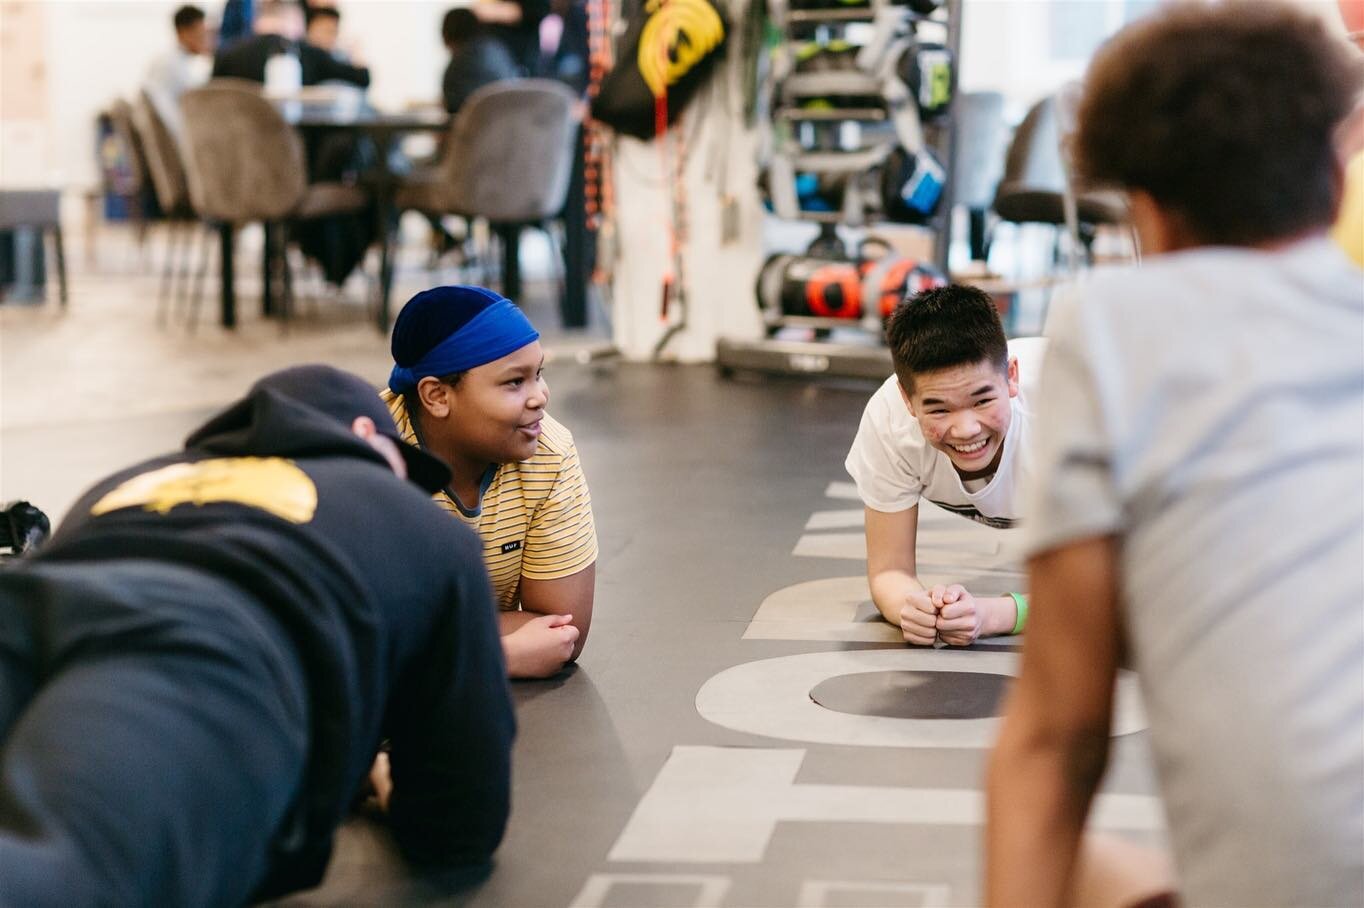 FOT Impact: This year, youth accessed our centre 3,461 times - stats reflect July 2021 - June 2022 ⁠
⁠
Face of Today centre welcomes youth an average of 6 days a week for various programs and a safe space to connect with friends and community.⁠
⁠
📸 